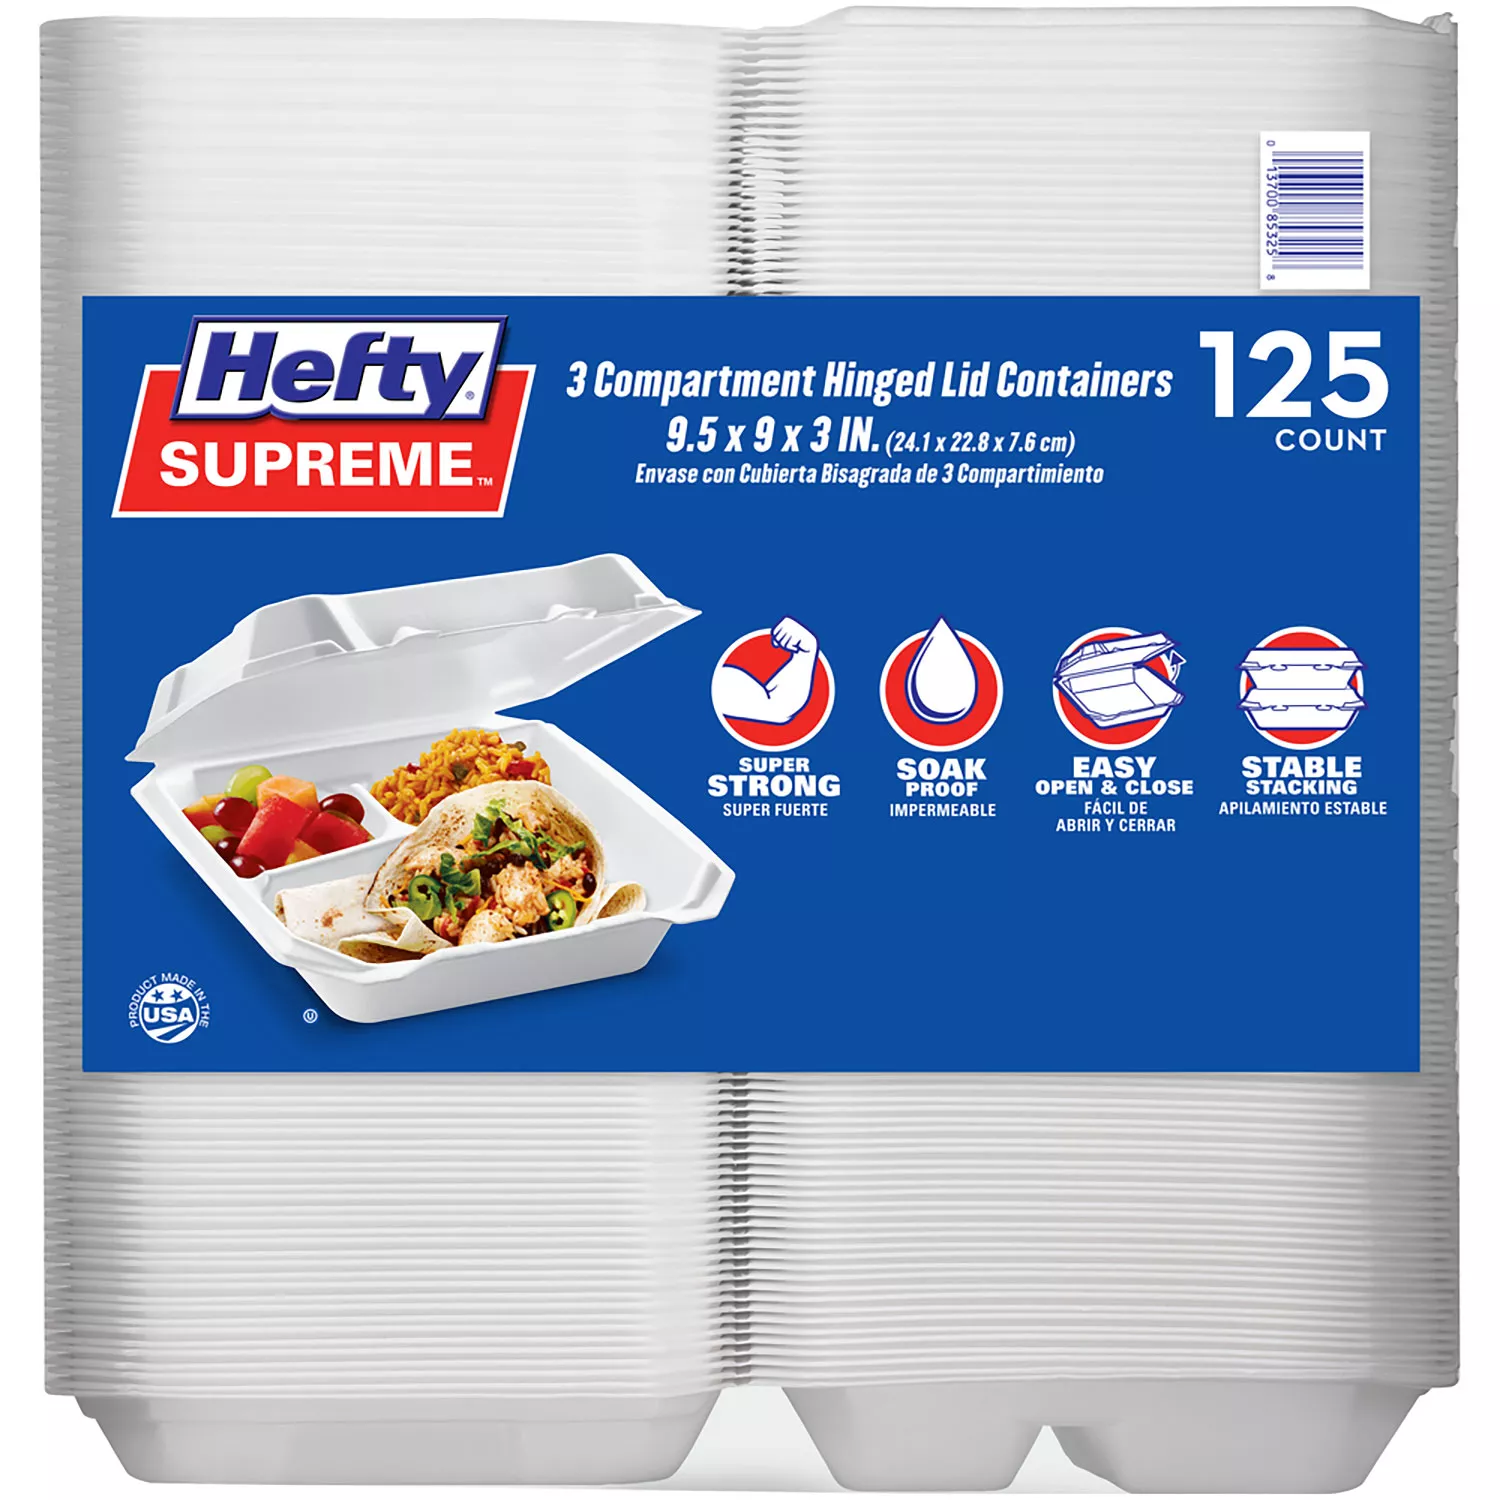 Hefty Supreme Foam 3 Compartment HLC (125 ct.)